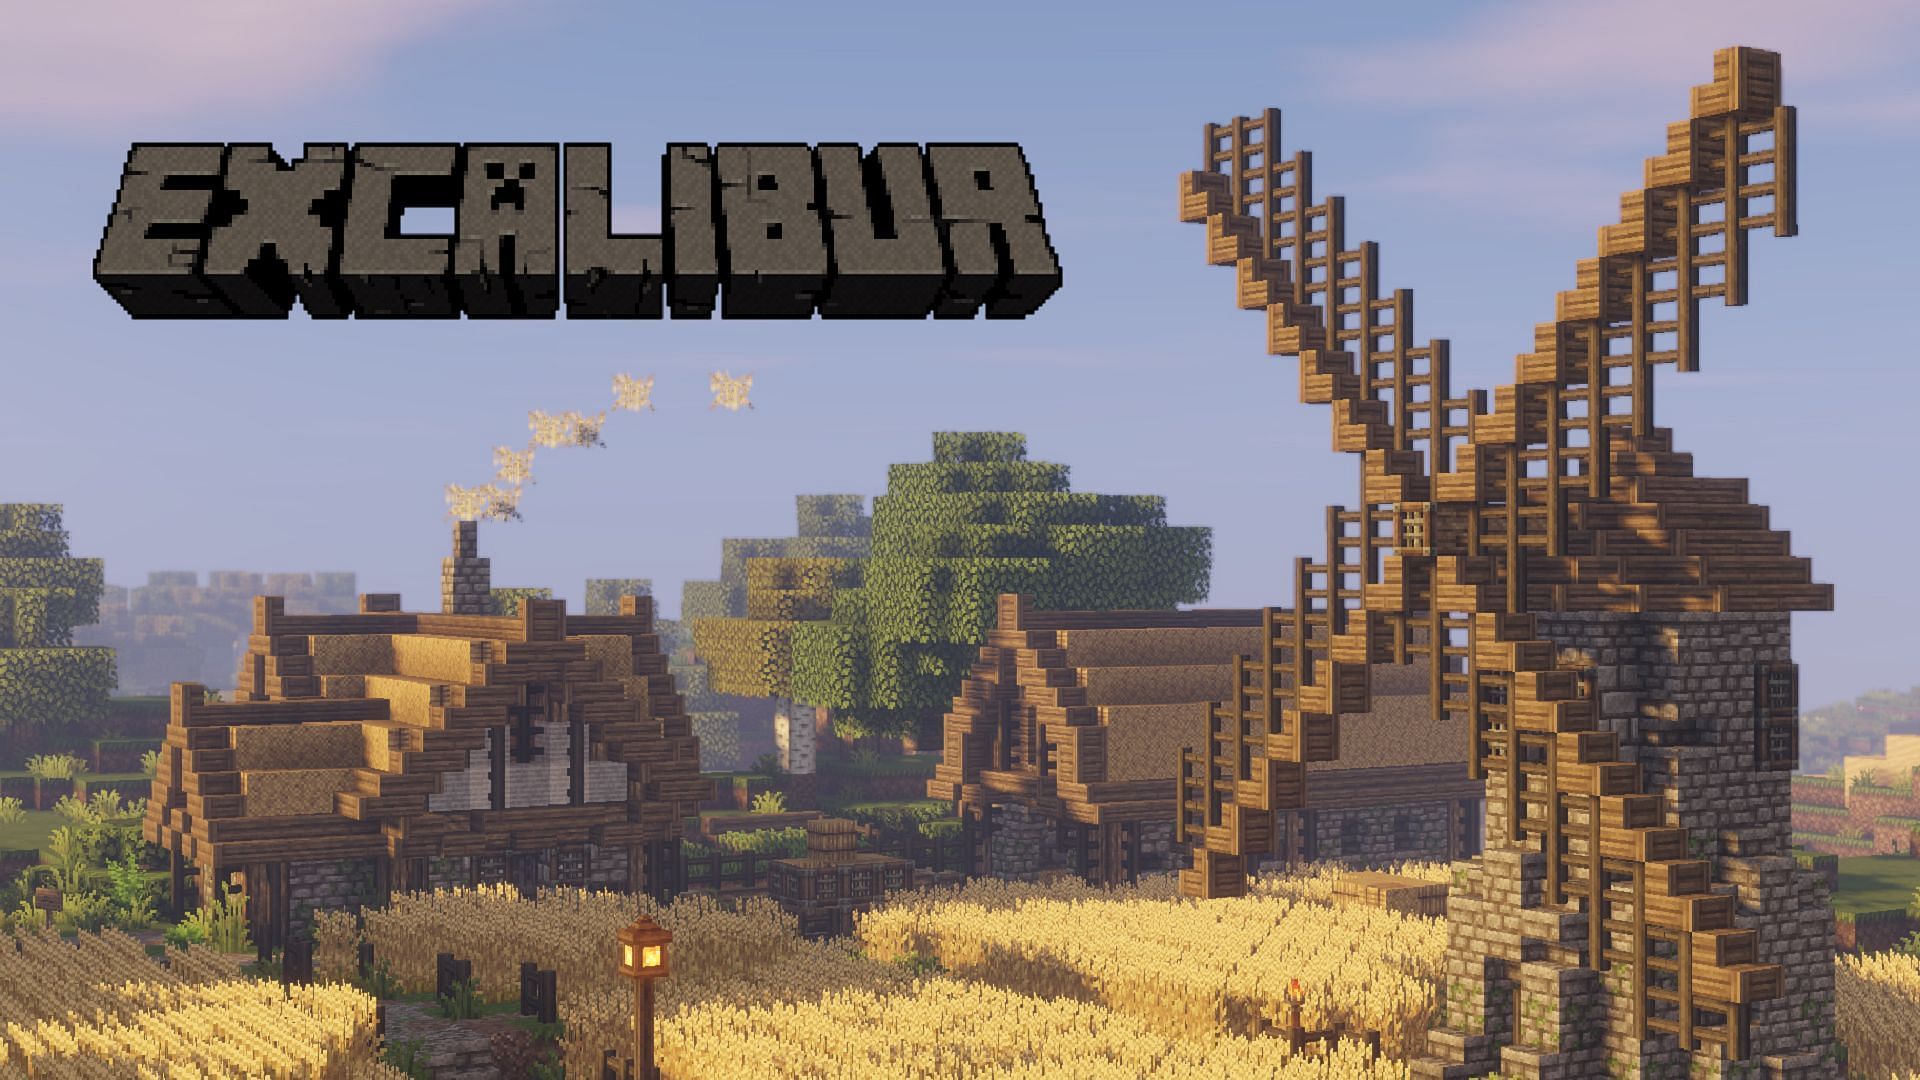 Excalibur could be the perfect pack for medieval/fantasy Minecraft worlds (Image via Maffhew/CurseForge)